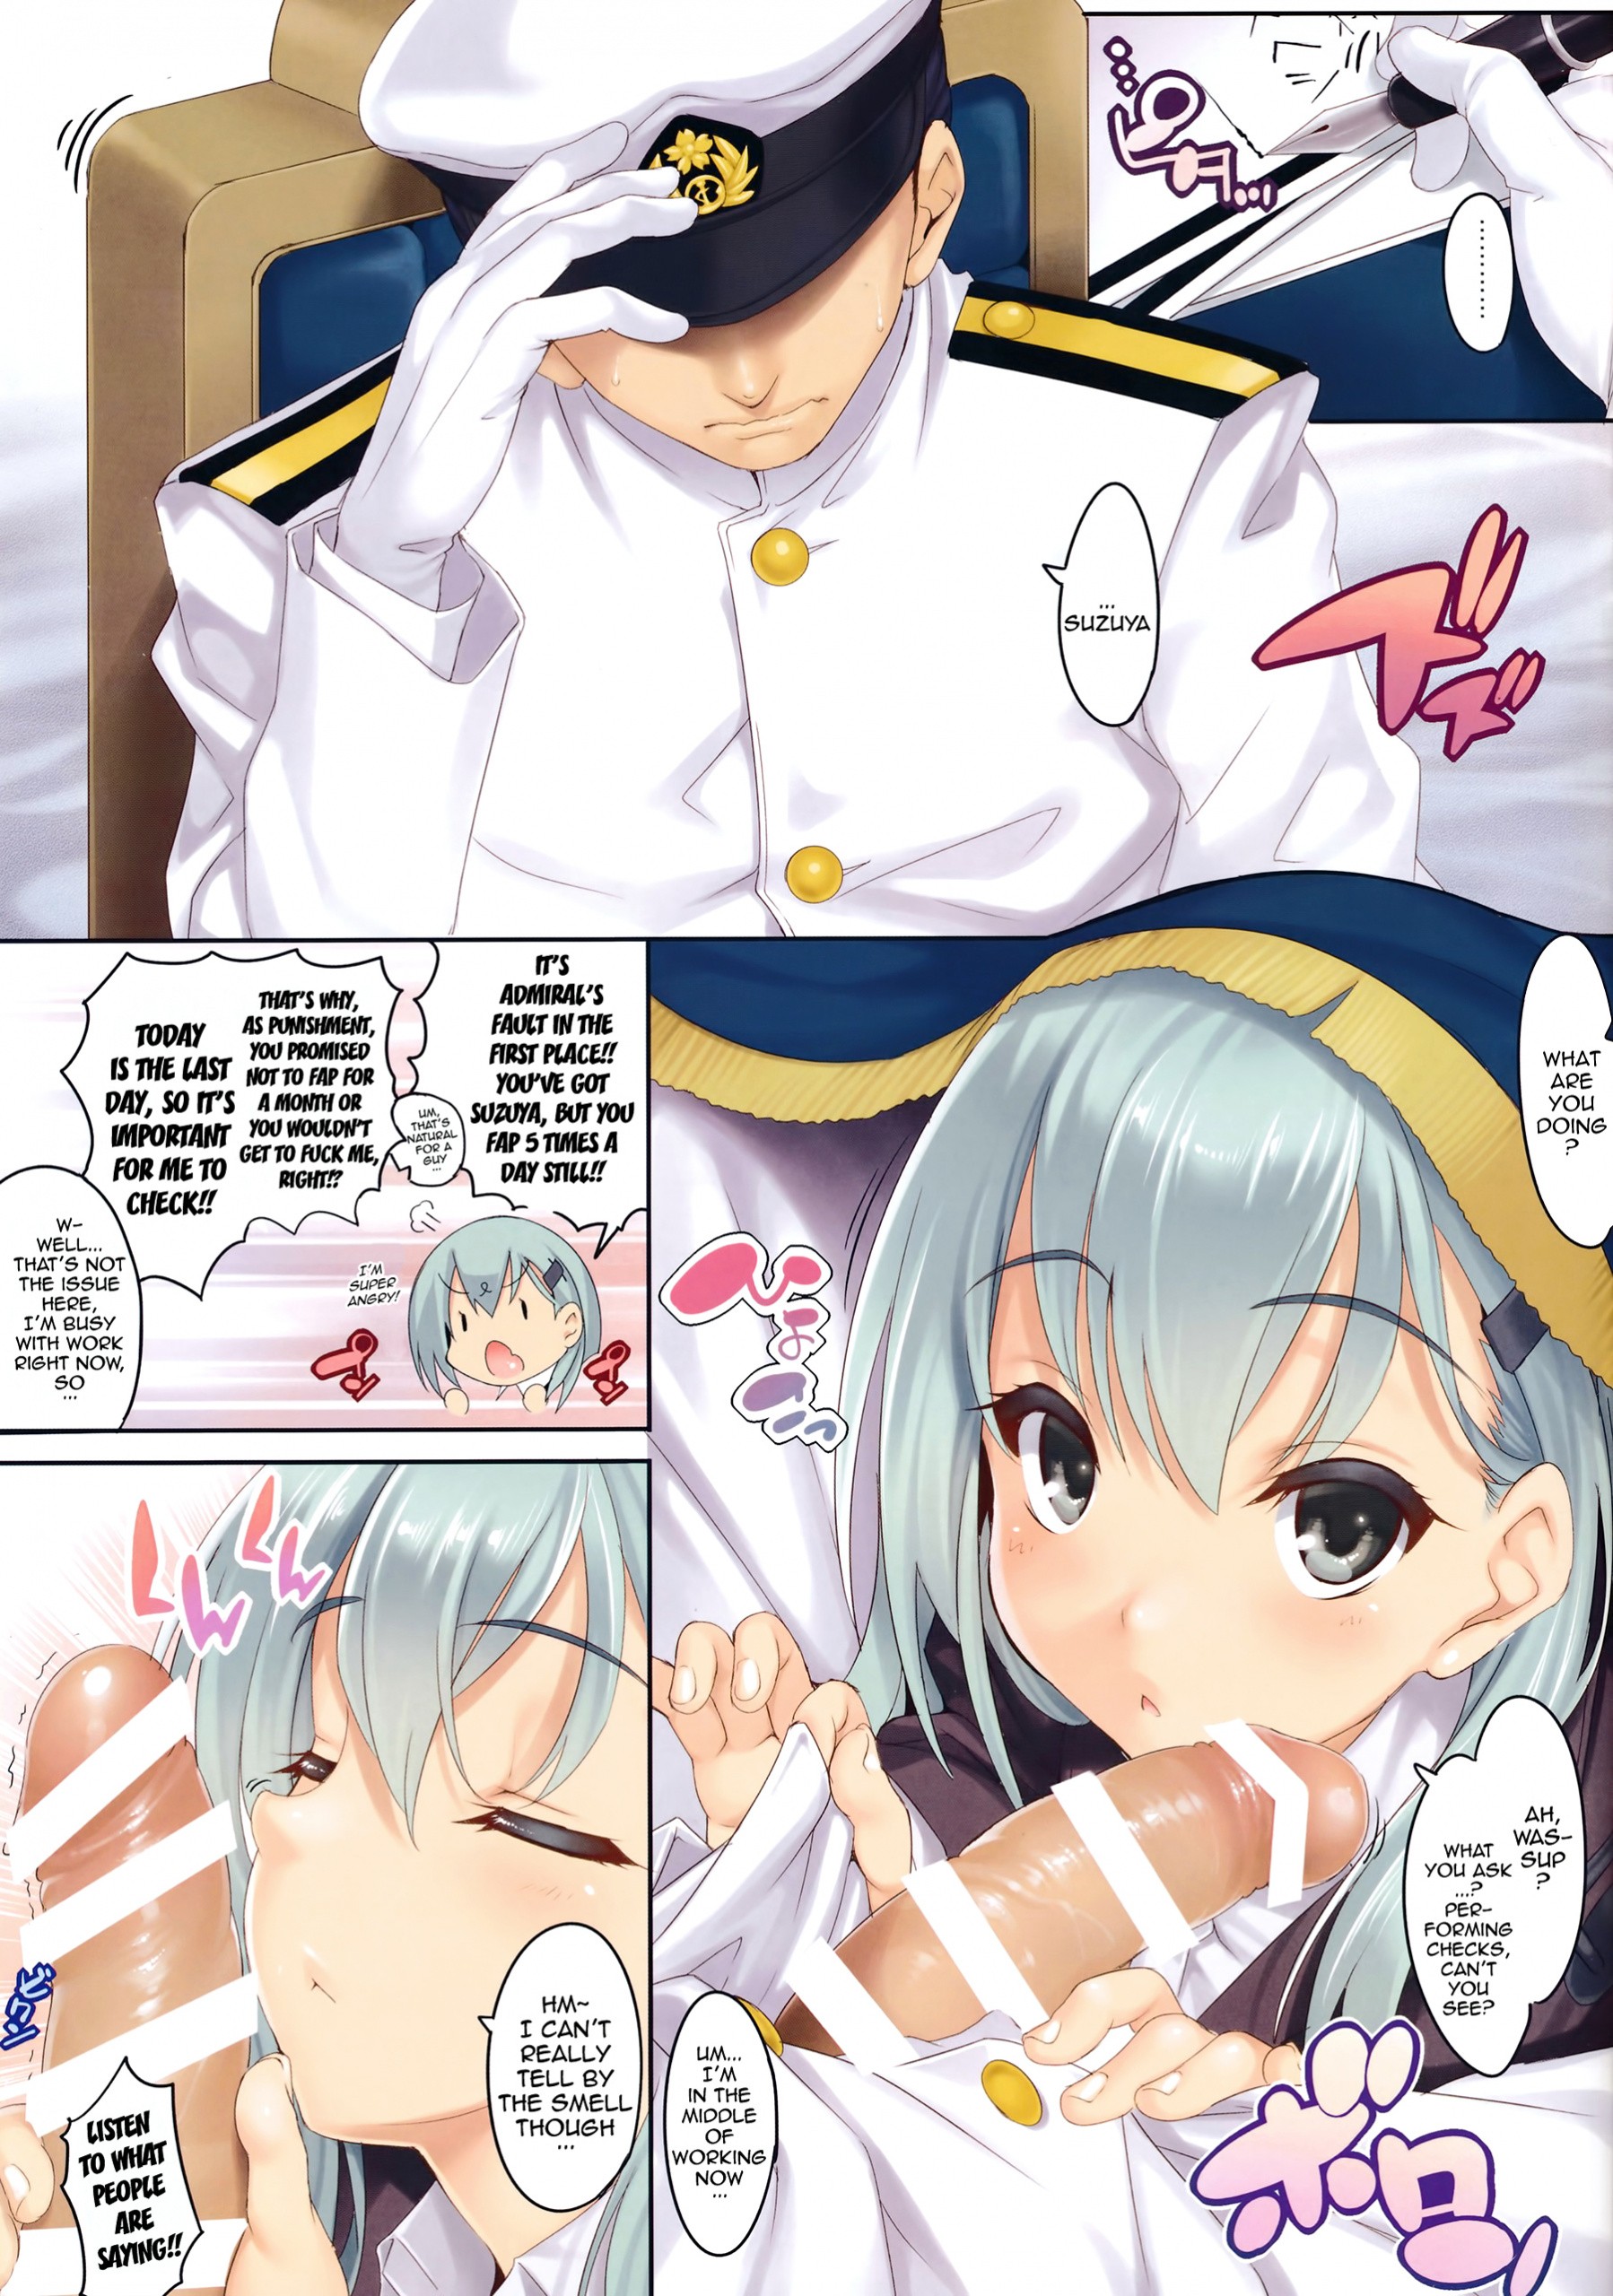 CL-orz 35 hentai manga picture 2